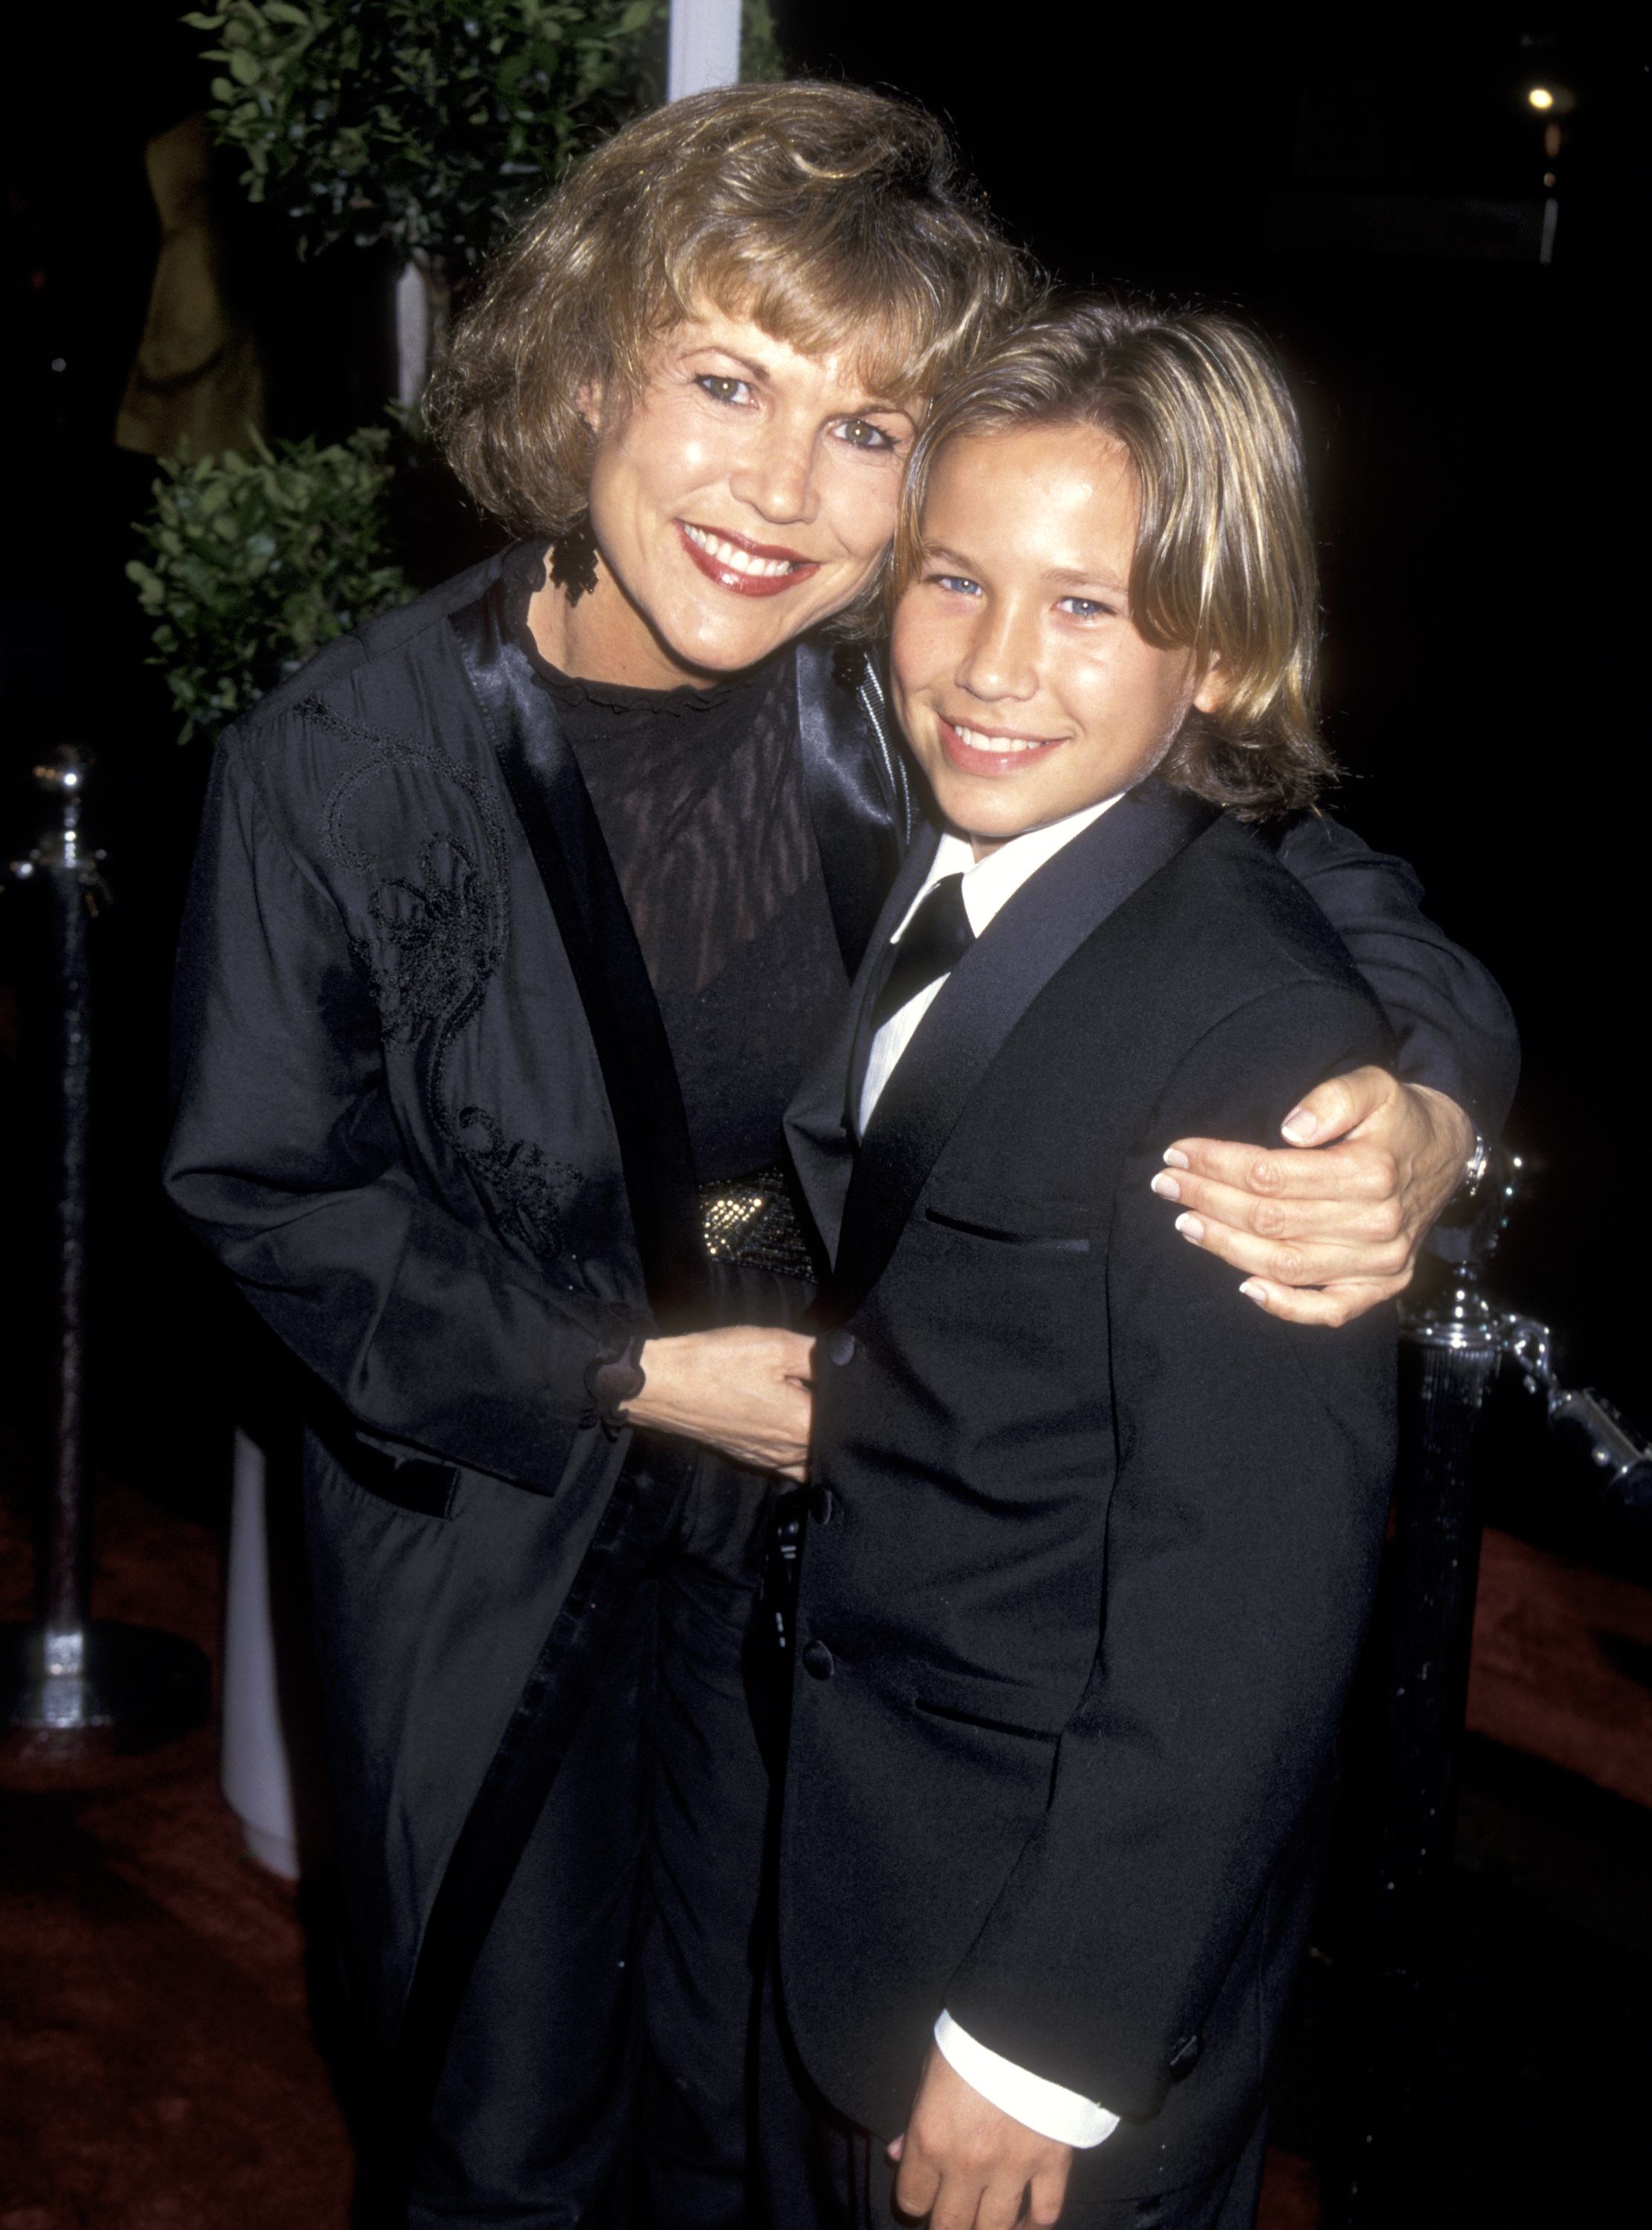 Actor Jonathan Taylor Thomas and mother Claudine Weiss attend the 21st Annual People's Choice Awards on March 5, 1995, at Universal Studios in Universal City, California. | Source: Getty Images